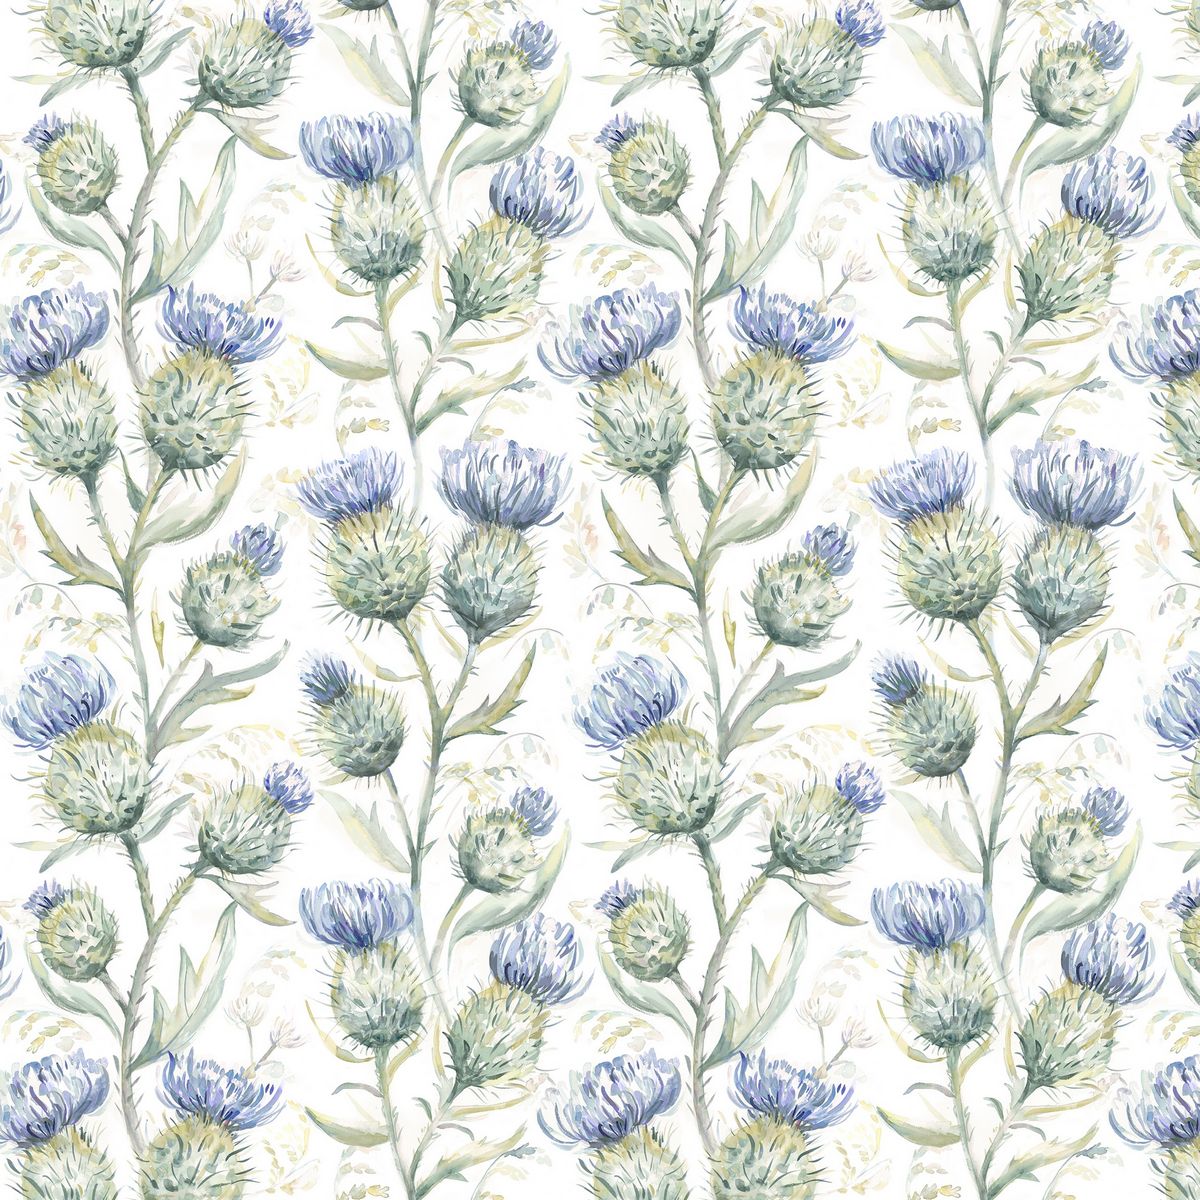 Thistle Glen Winter Fabric by Voyage Maison